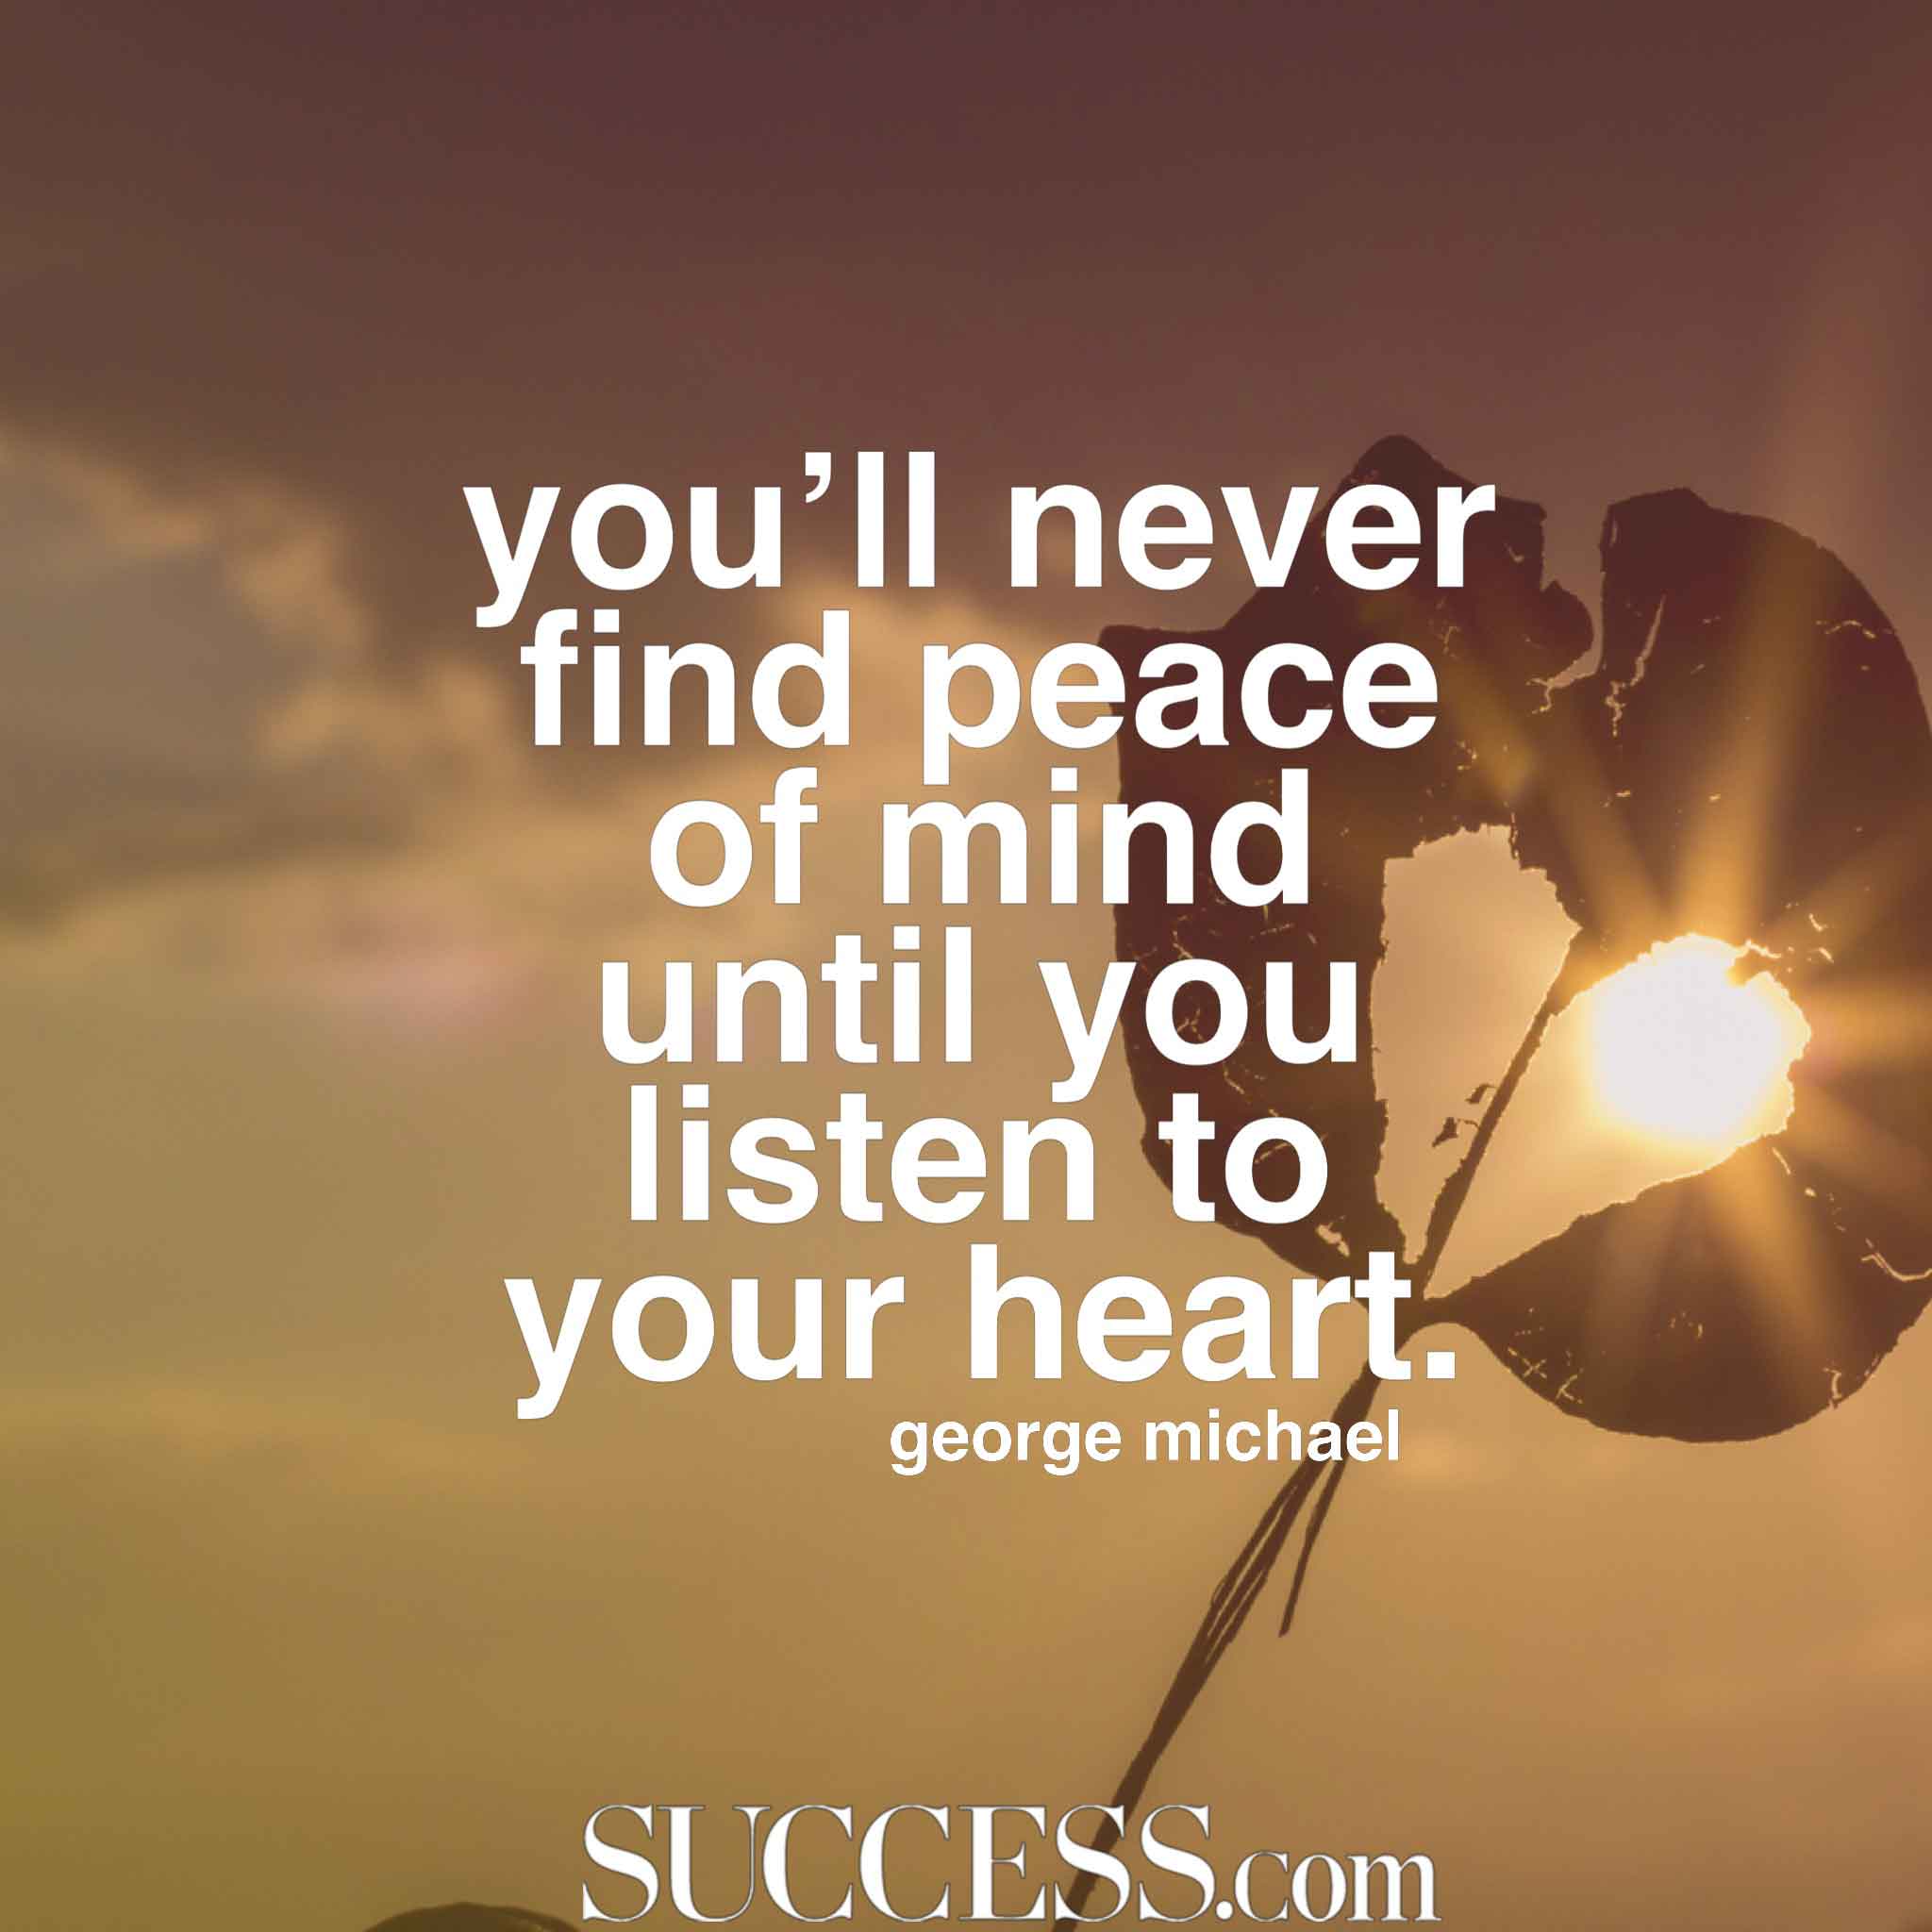 17 Quotes About Finding Inner Peace | Success